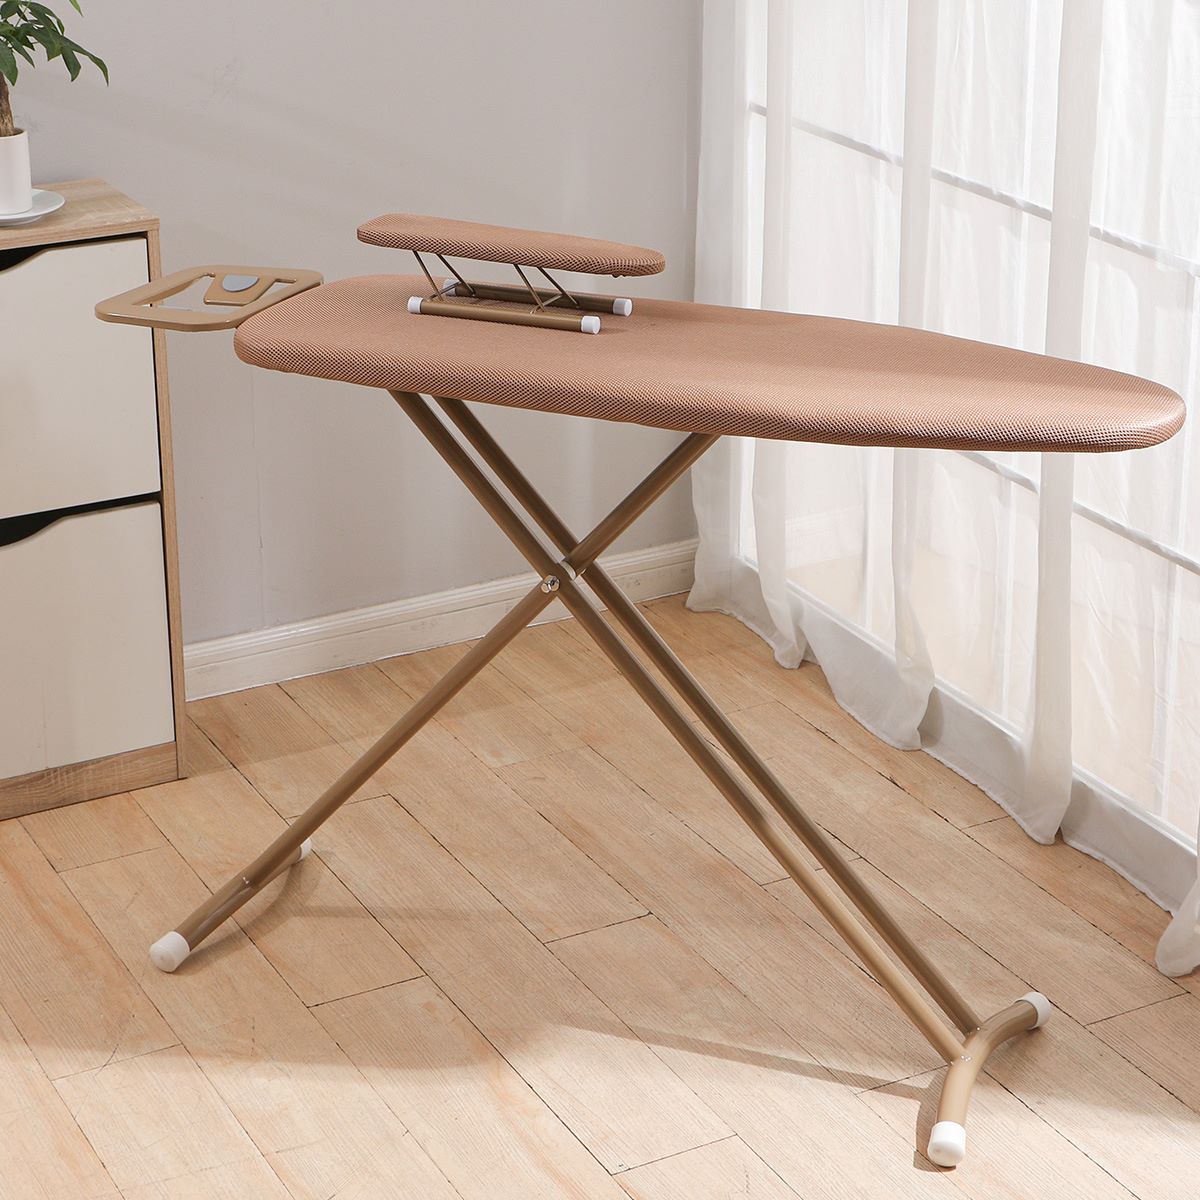 What Is An Ironing Board Used For?